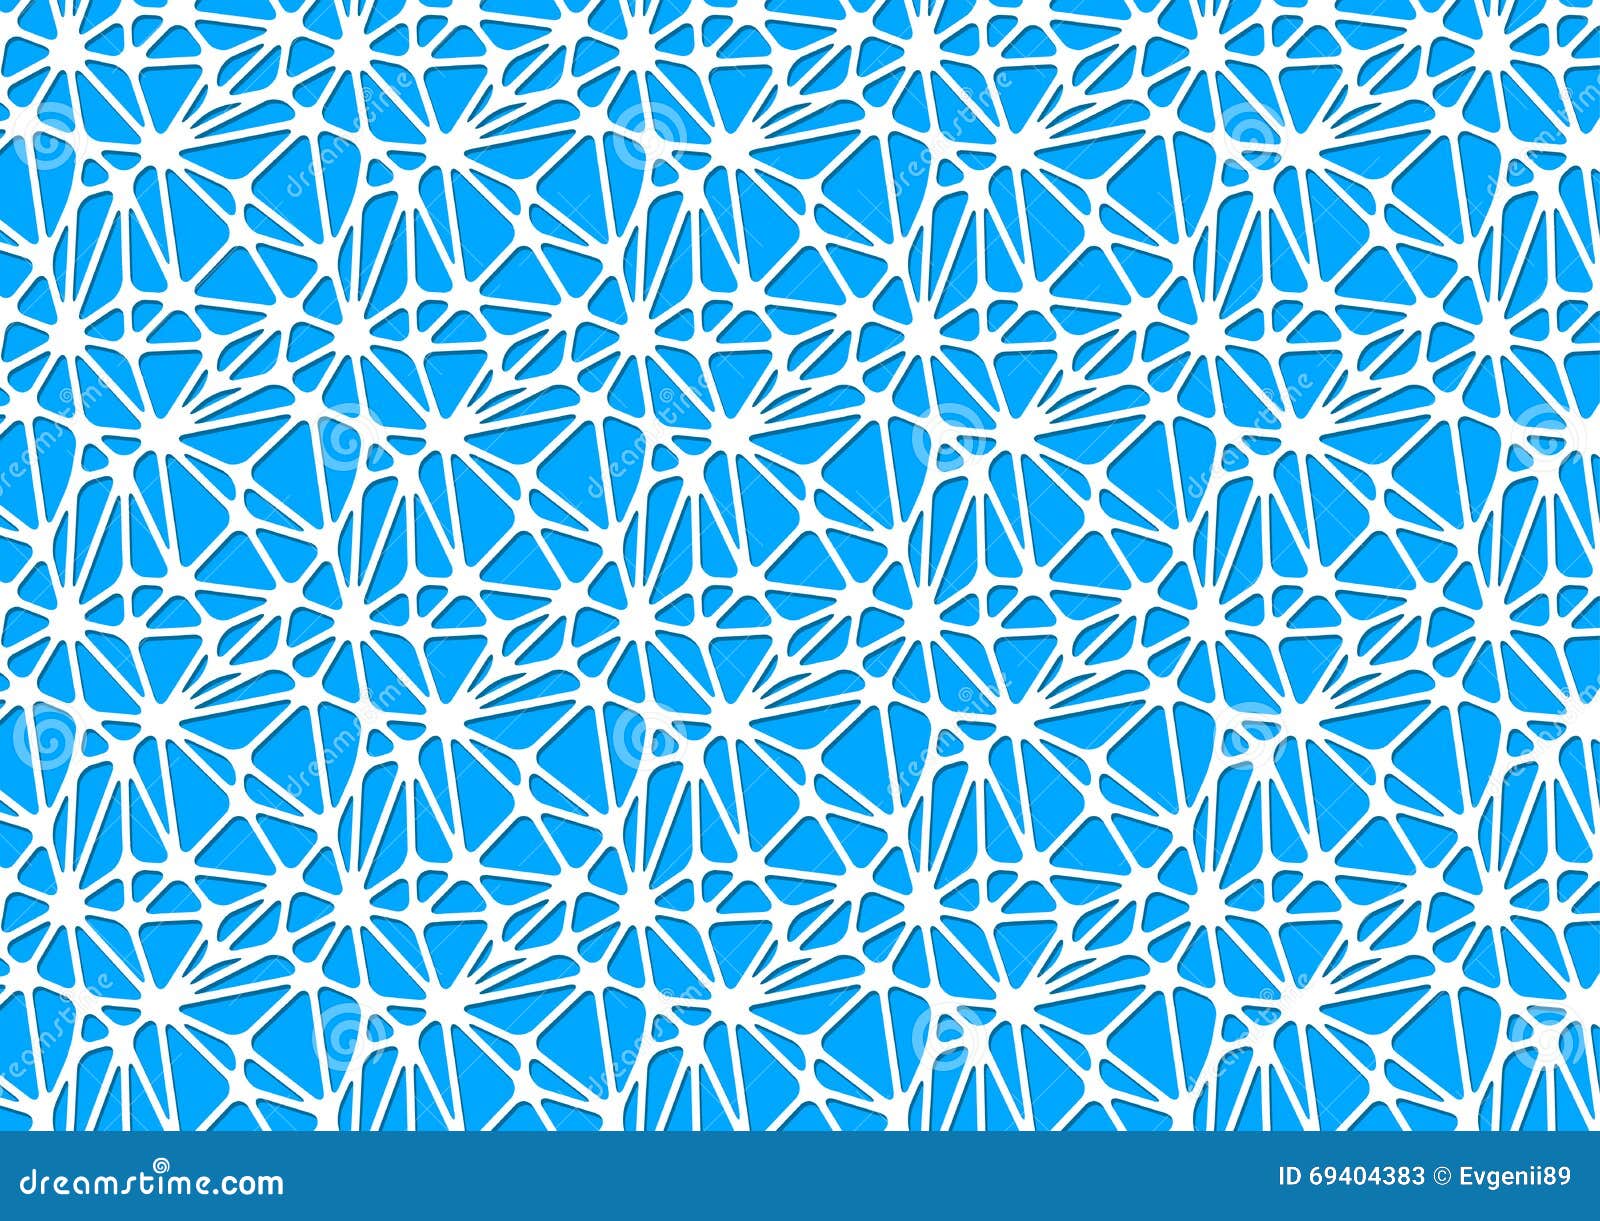 white neural network on blue, abstract background a4 size